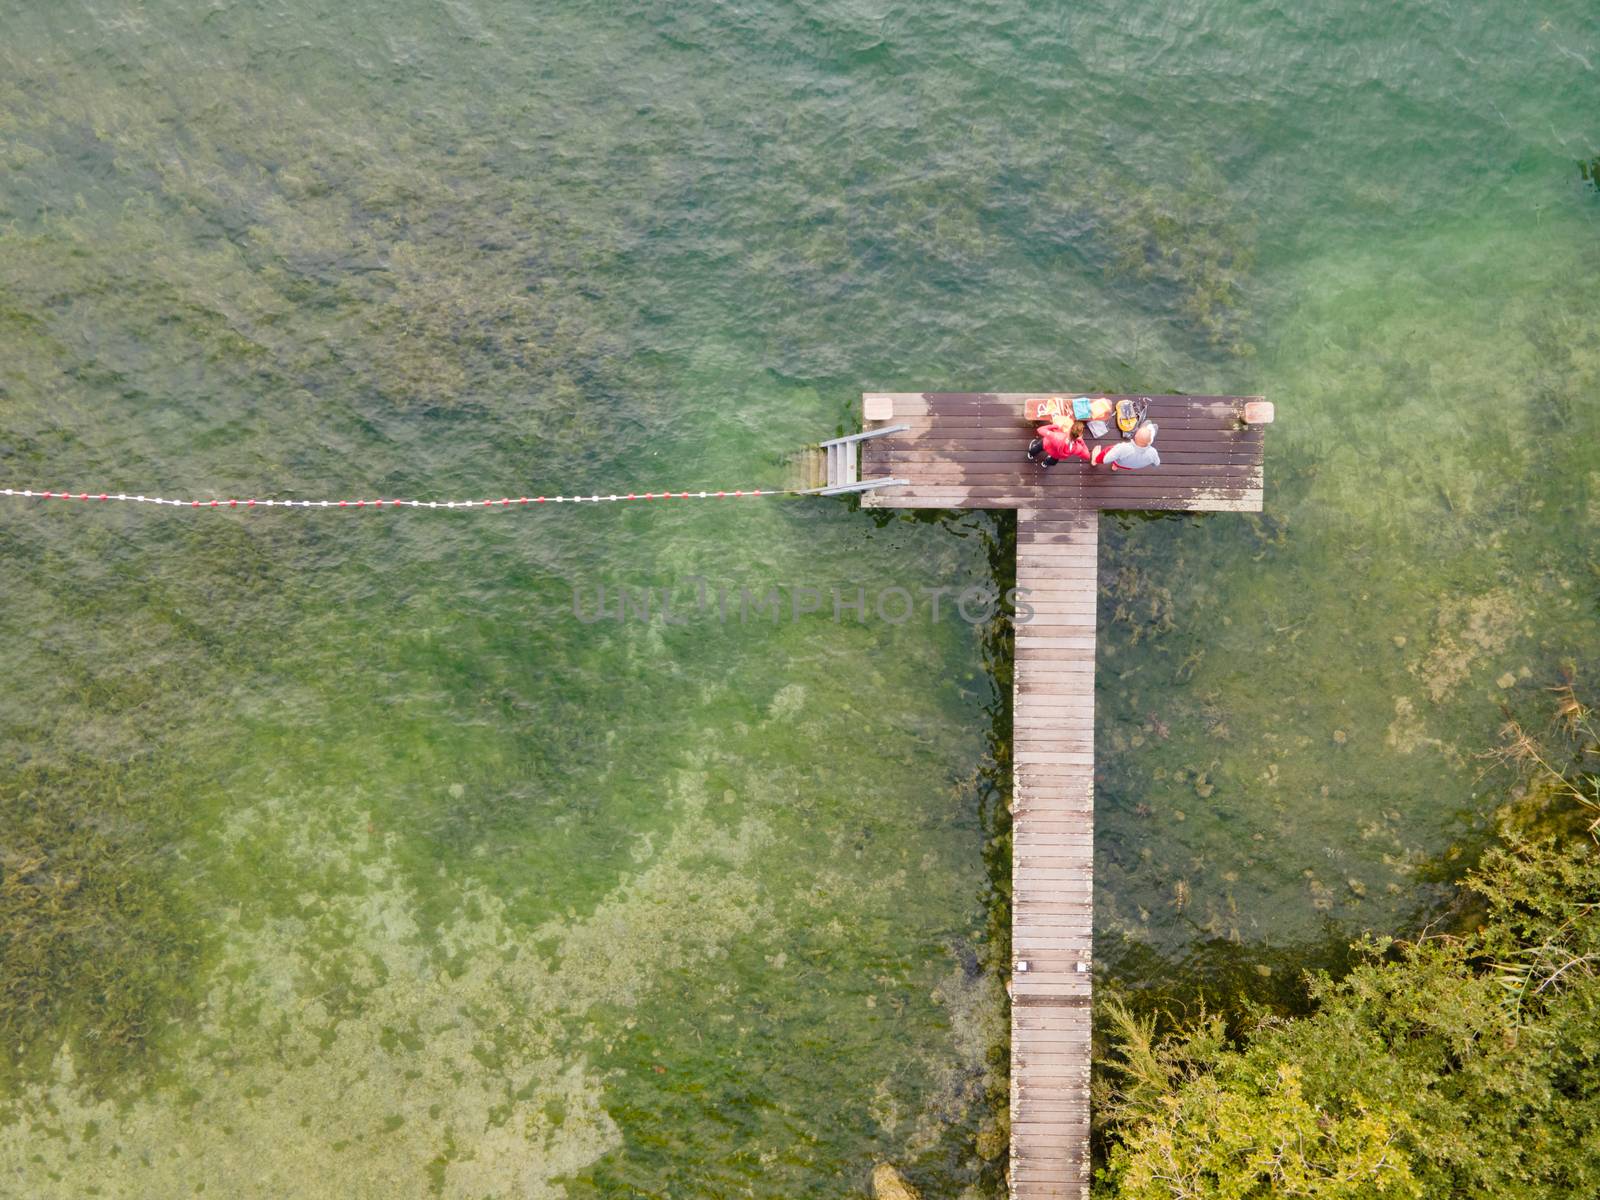 drone shot of people swimming in lake.